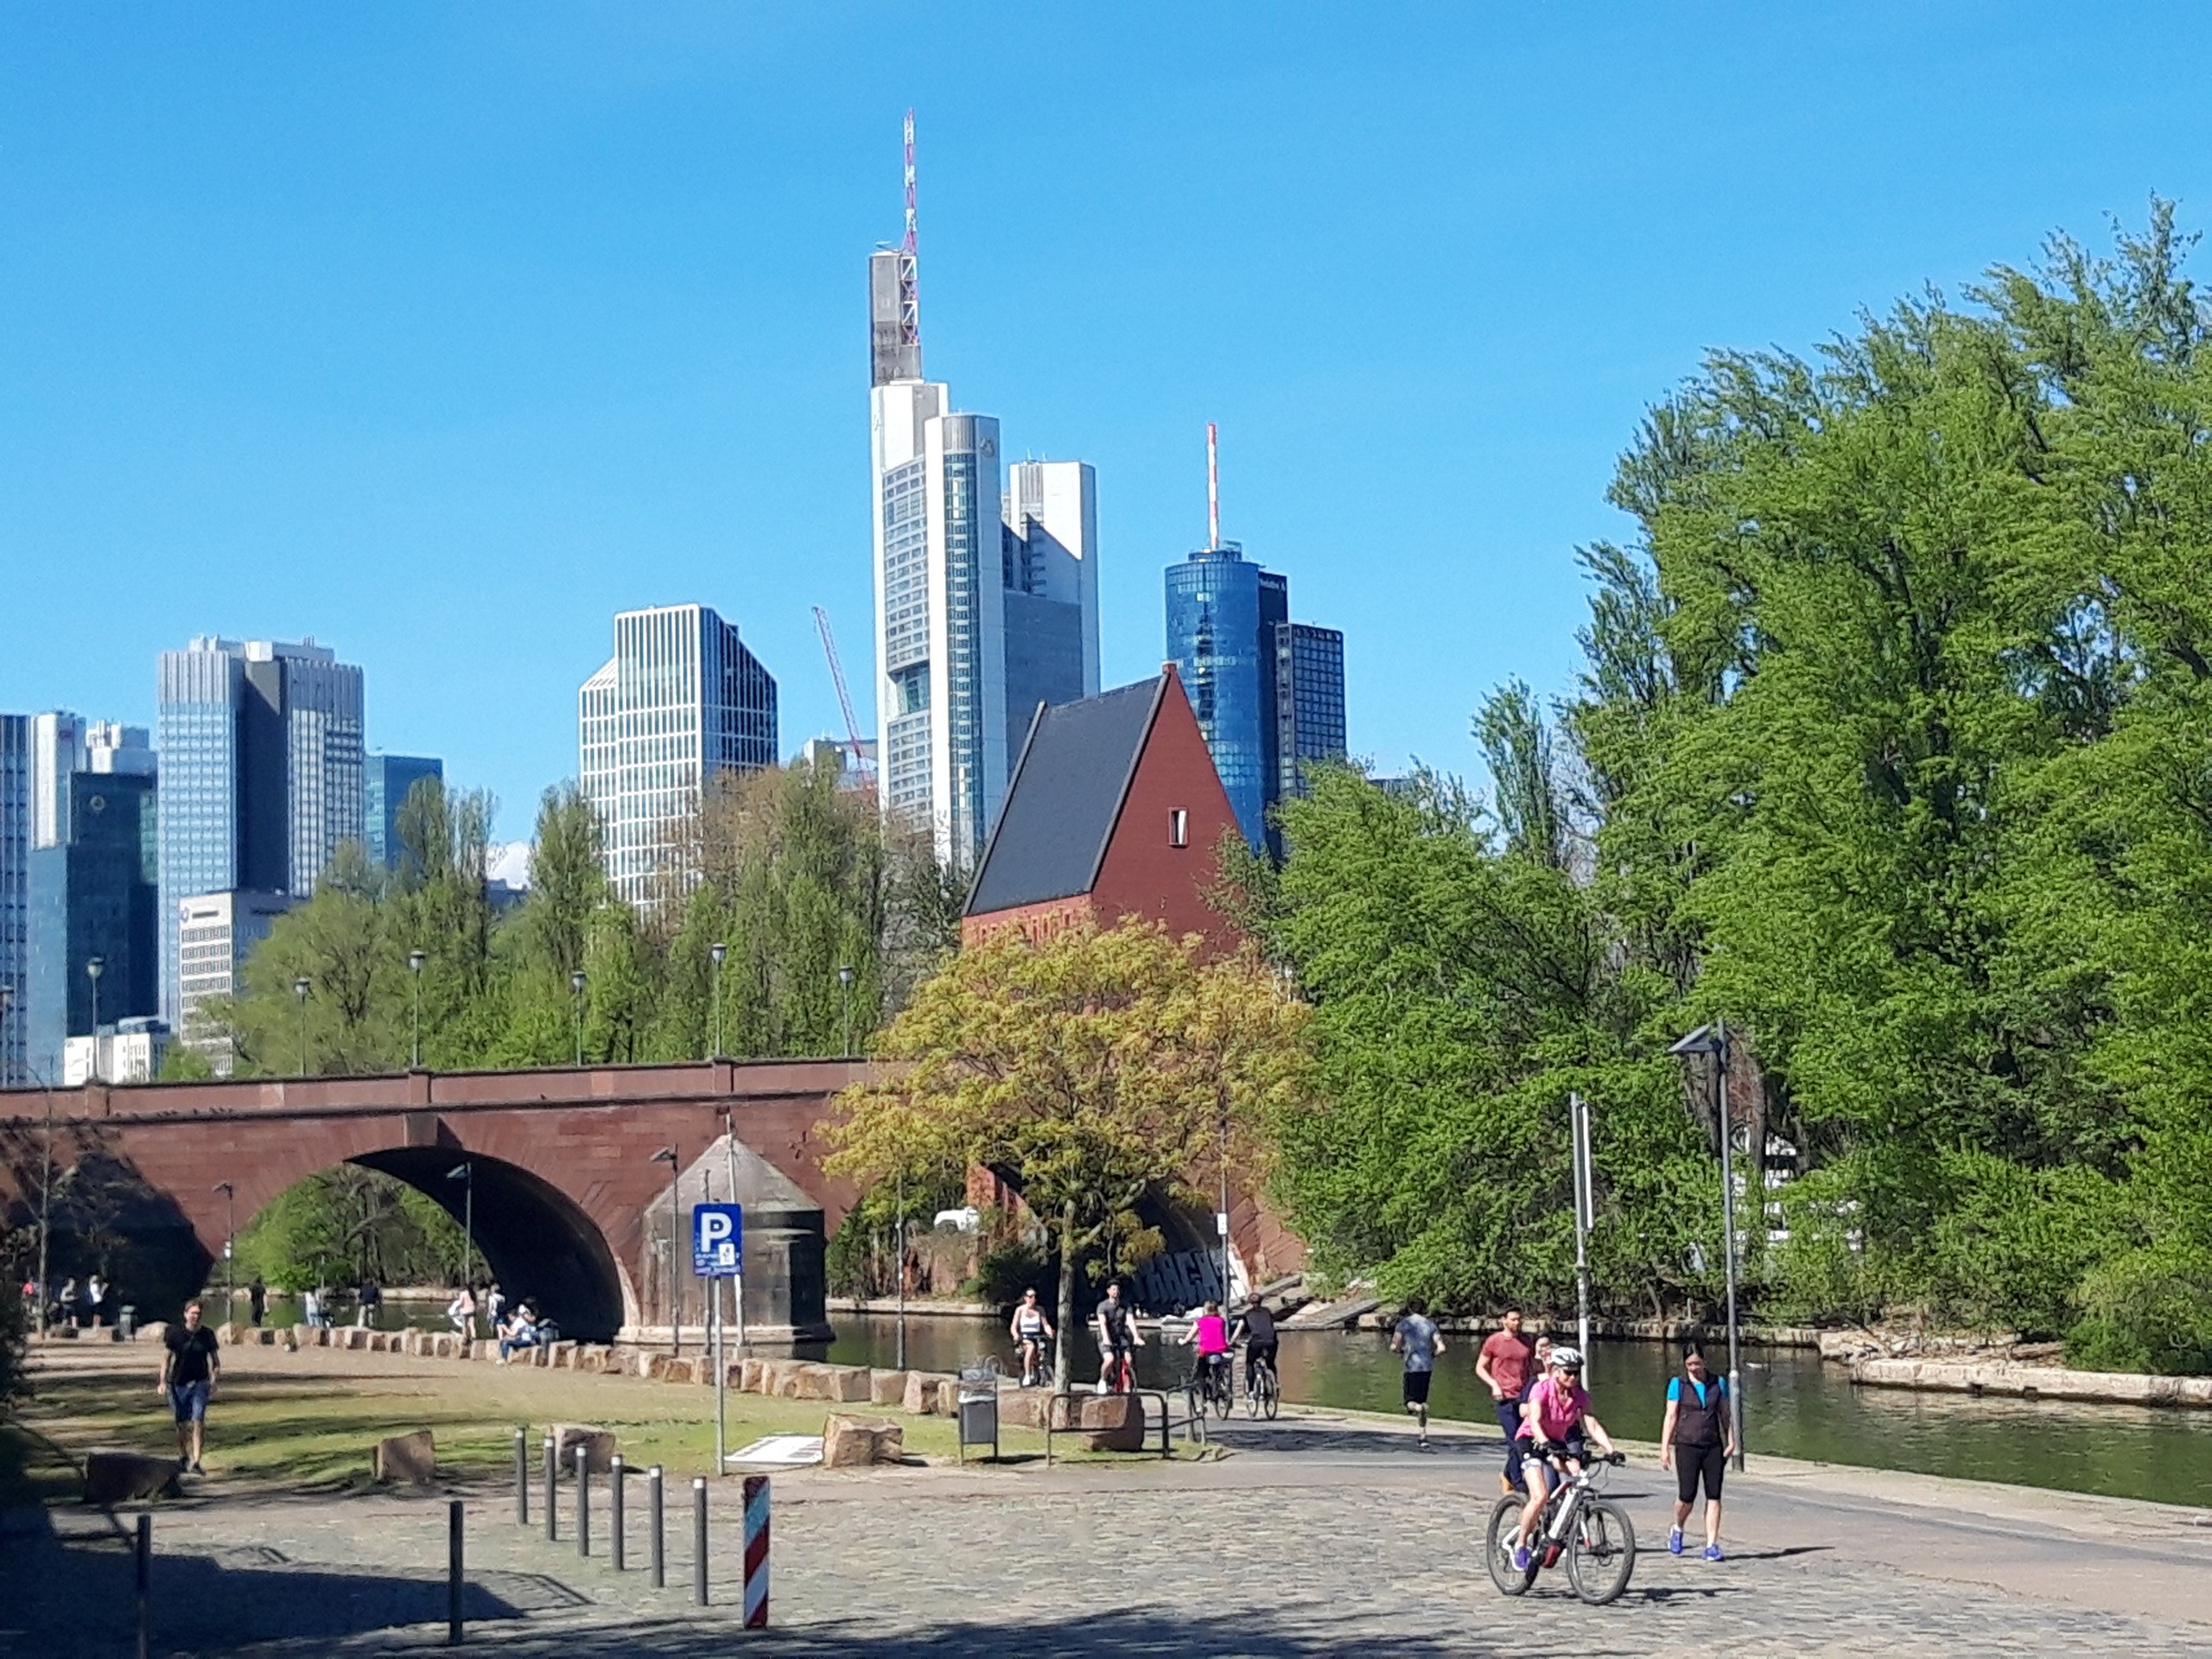 Visiting the centre of Frankfurt, Germany